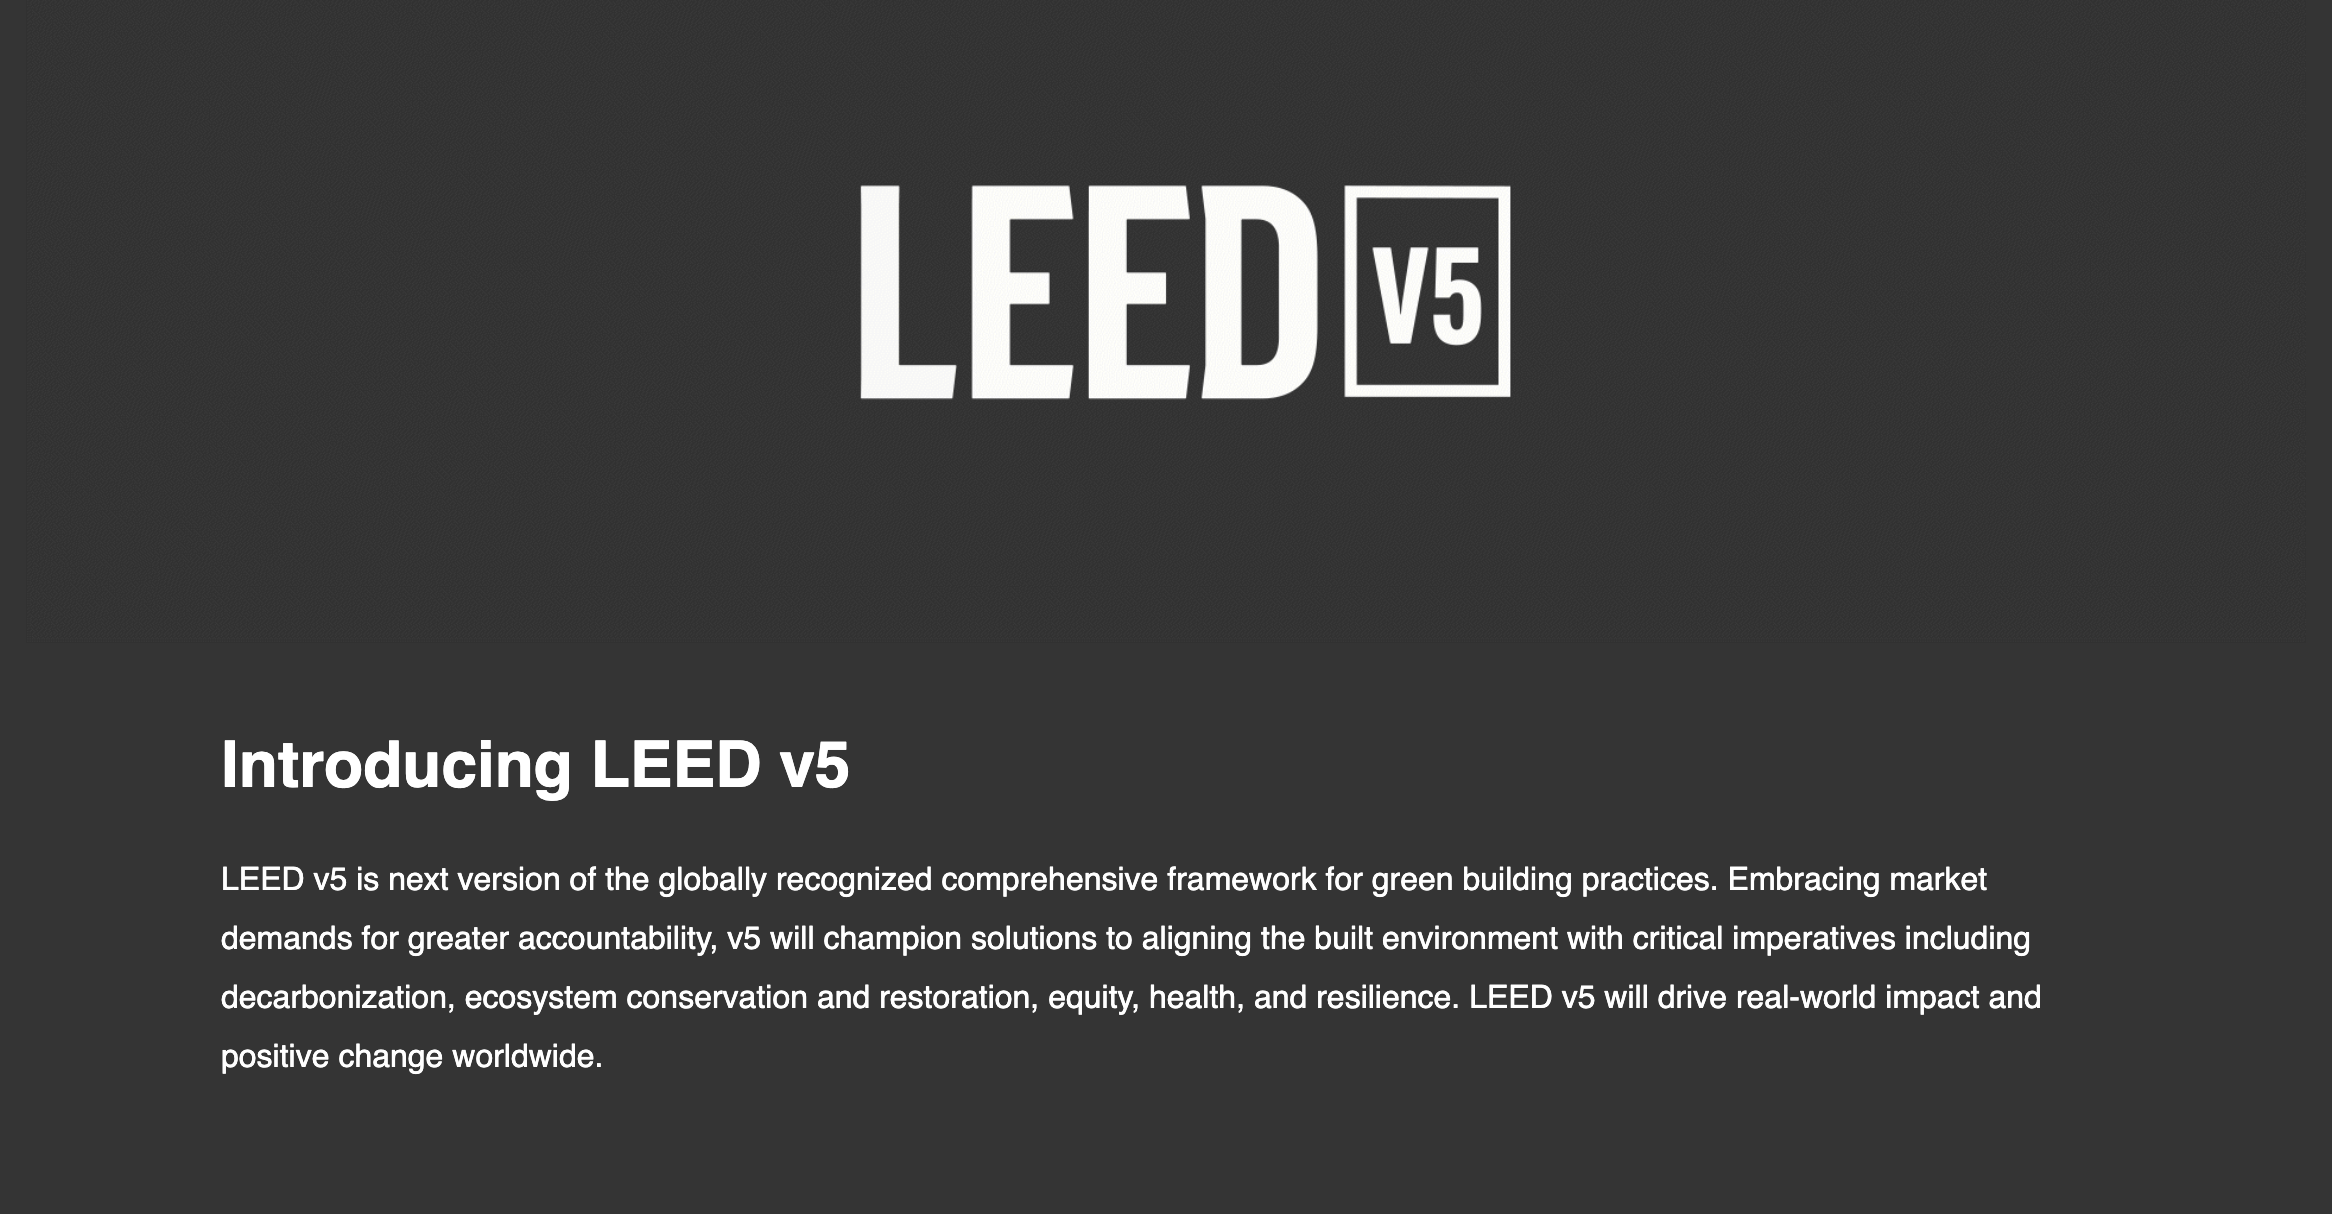 LEED v5 released for public comment